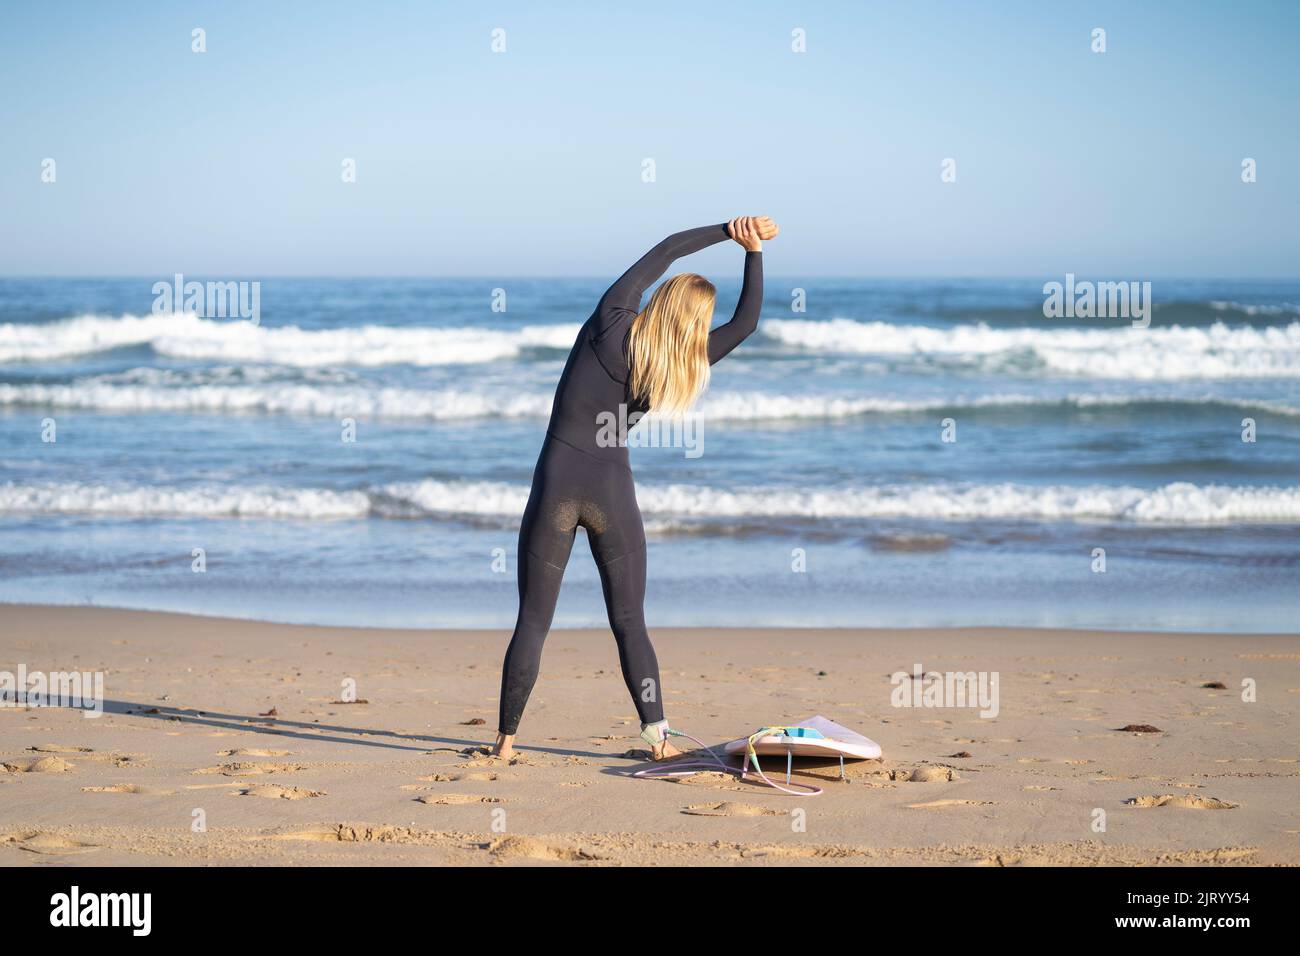 Surfer warming up at the beach with her surfboard on her side in the morning before surf. Stock Photo